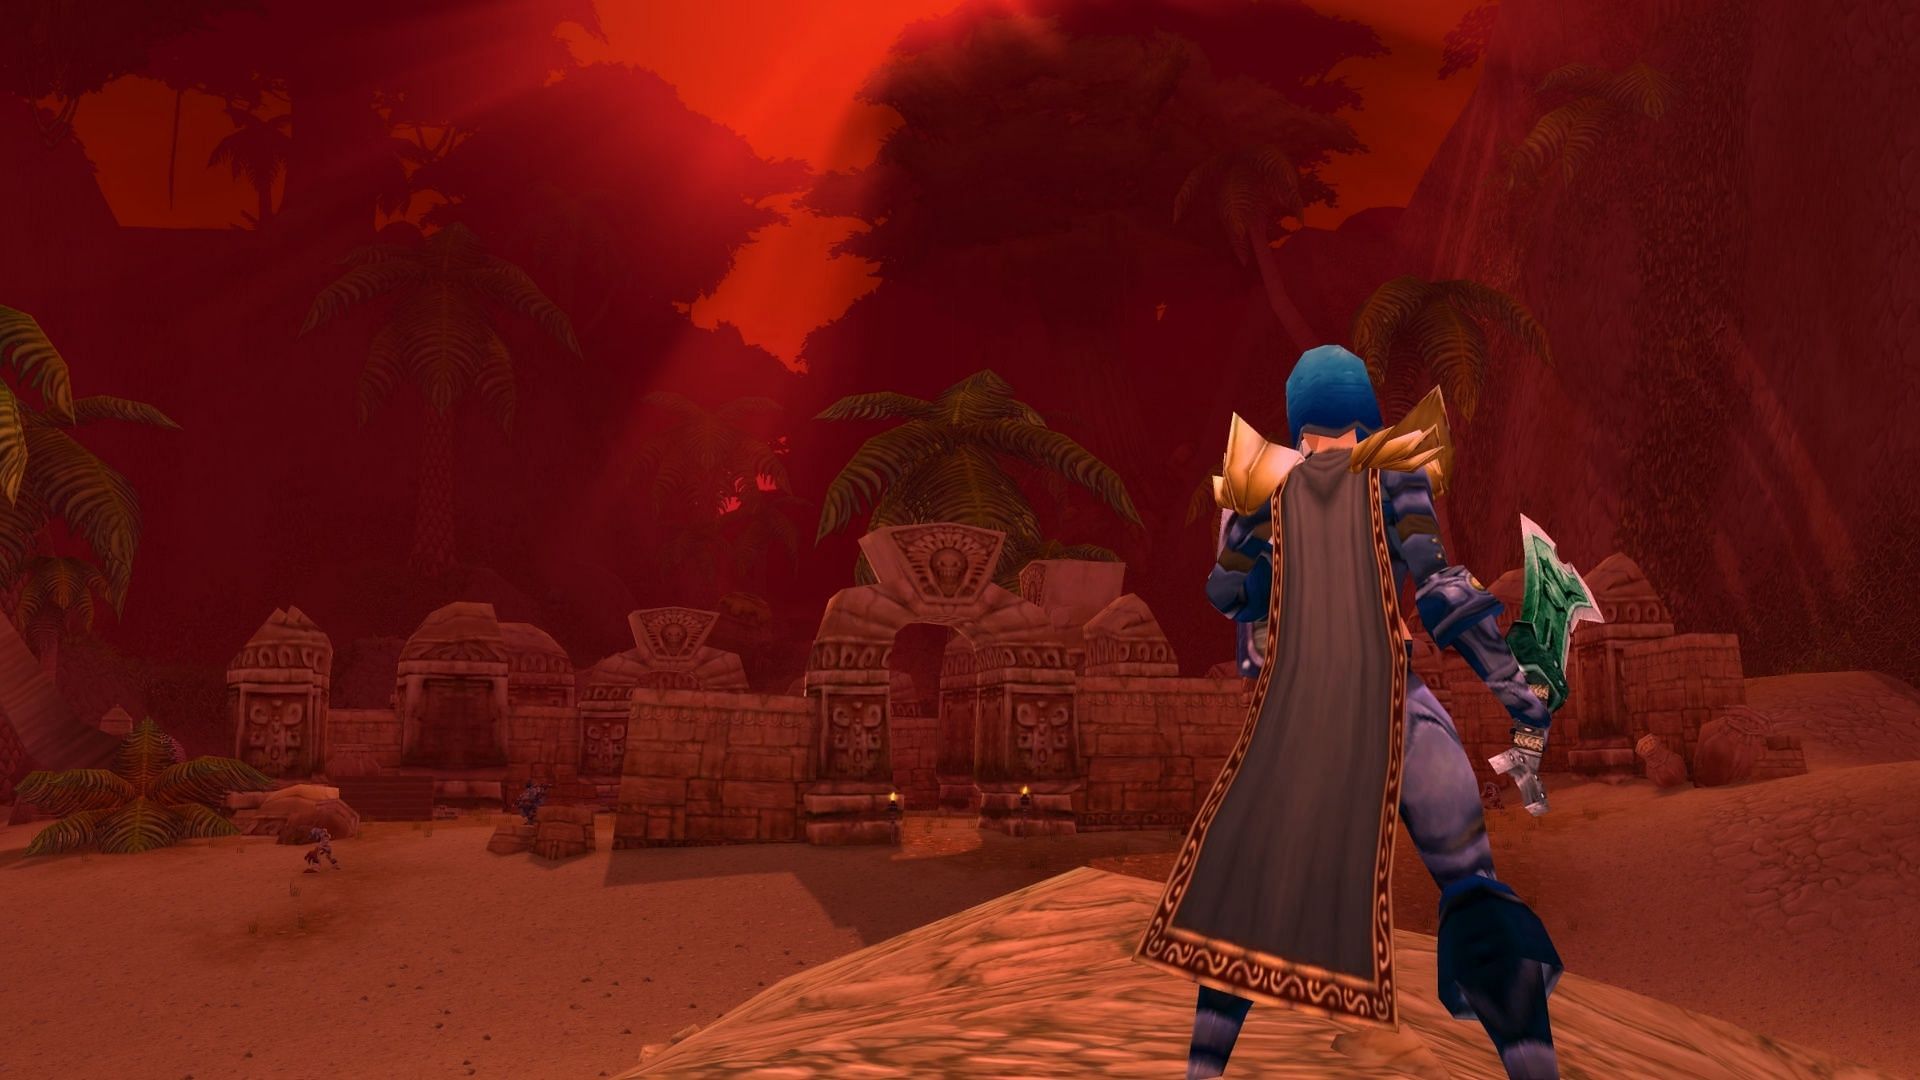 Who knows what awaits under the Blood Moon? (Image via Blizzard Entertainment)